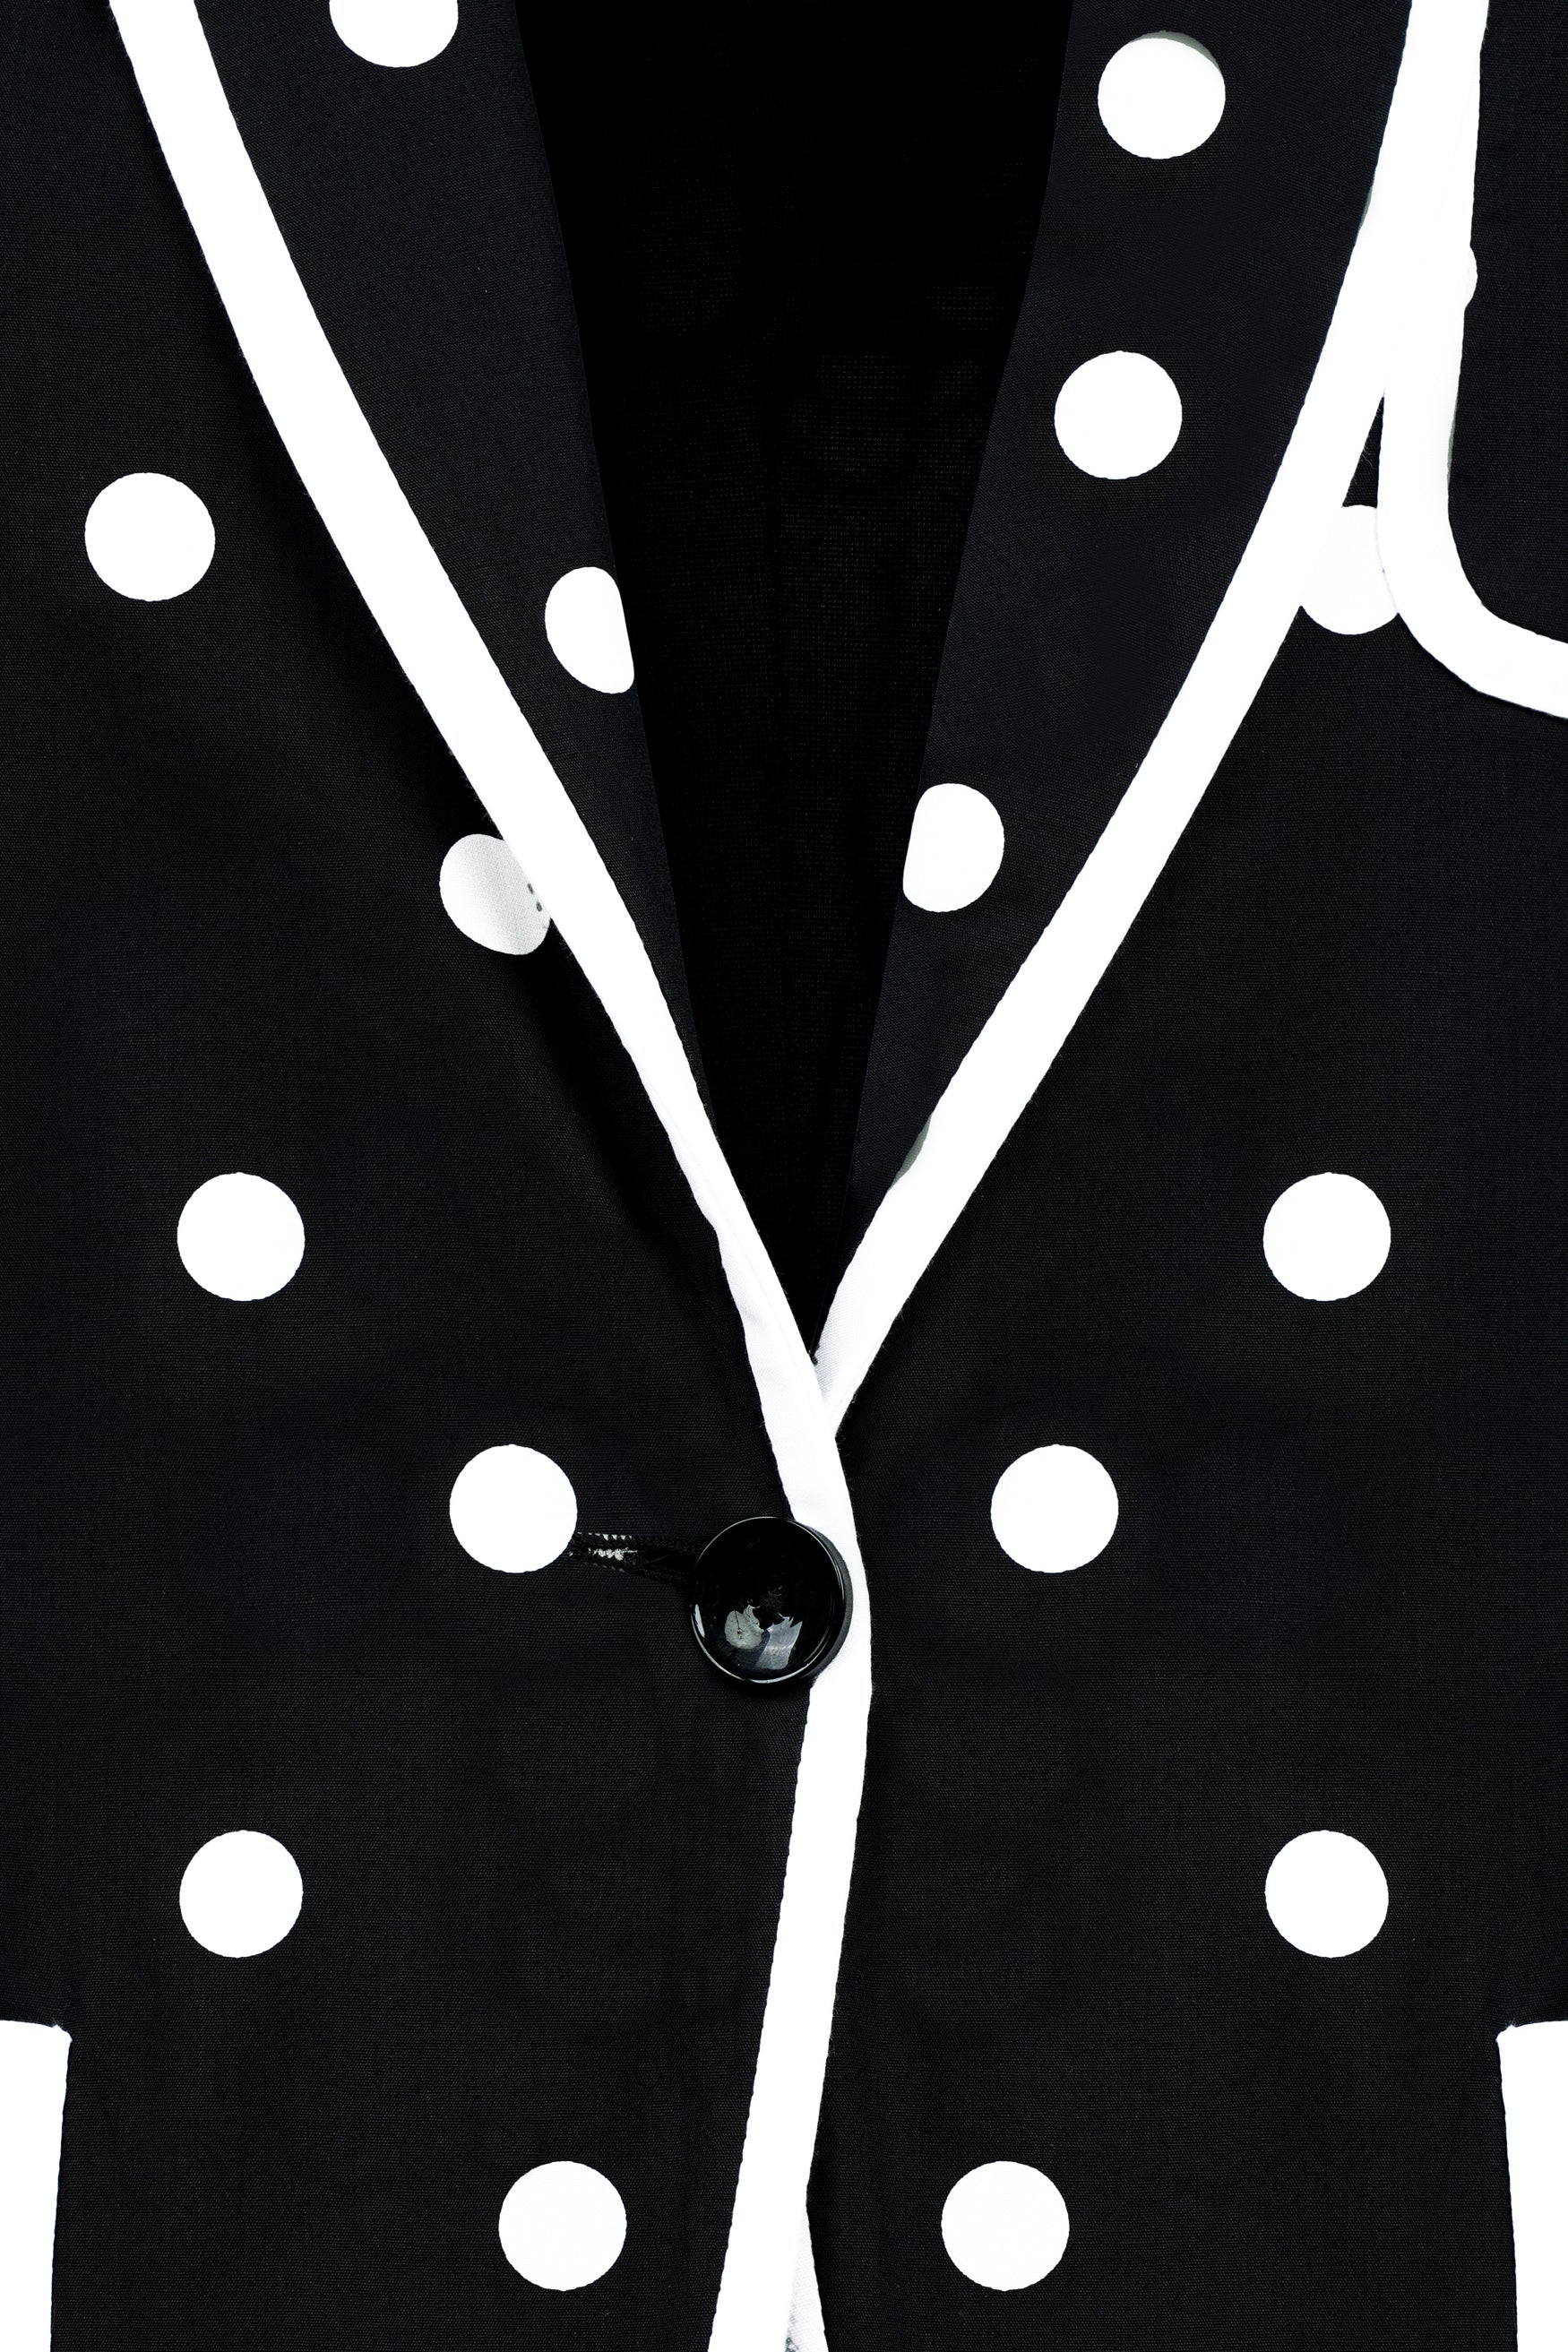 Jade Black and Bright White Polka Dotted With White Piping Work Premium Cotton Women’s Designer Suit